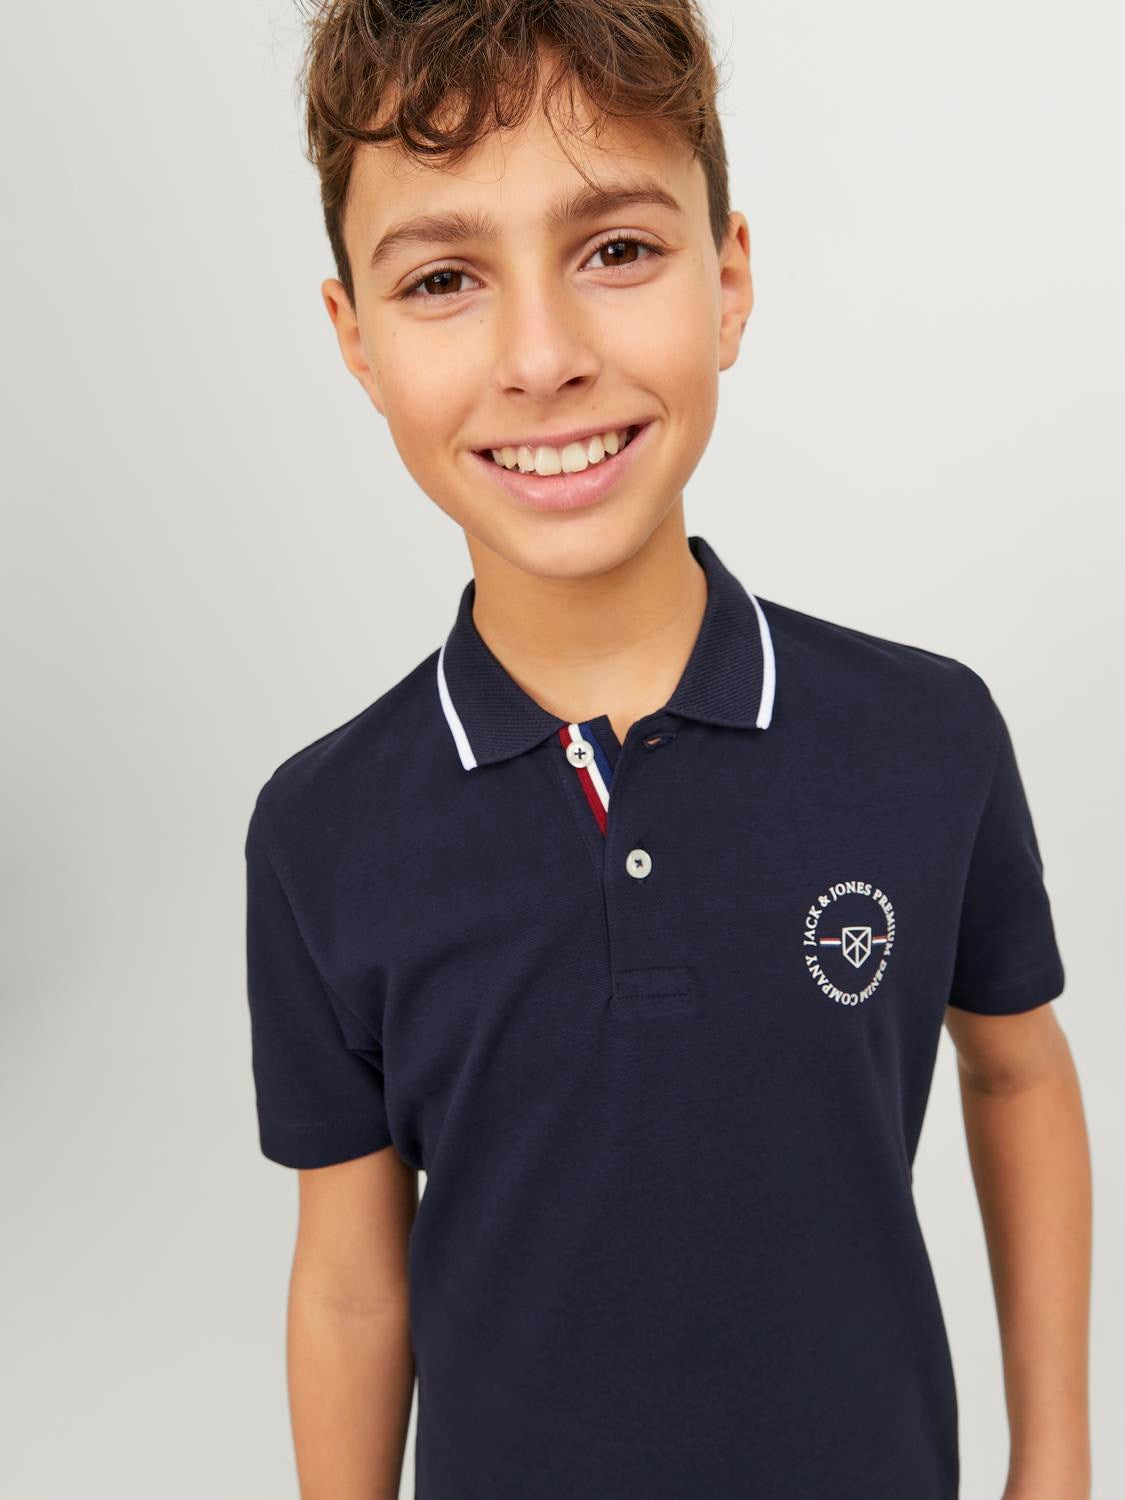 Shield Junior Boy Seabourne Polo Shirt-Front view